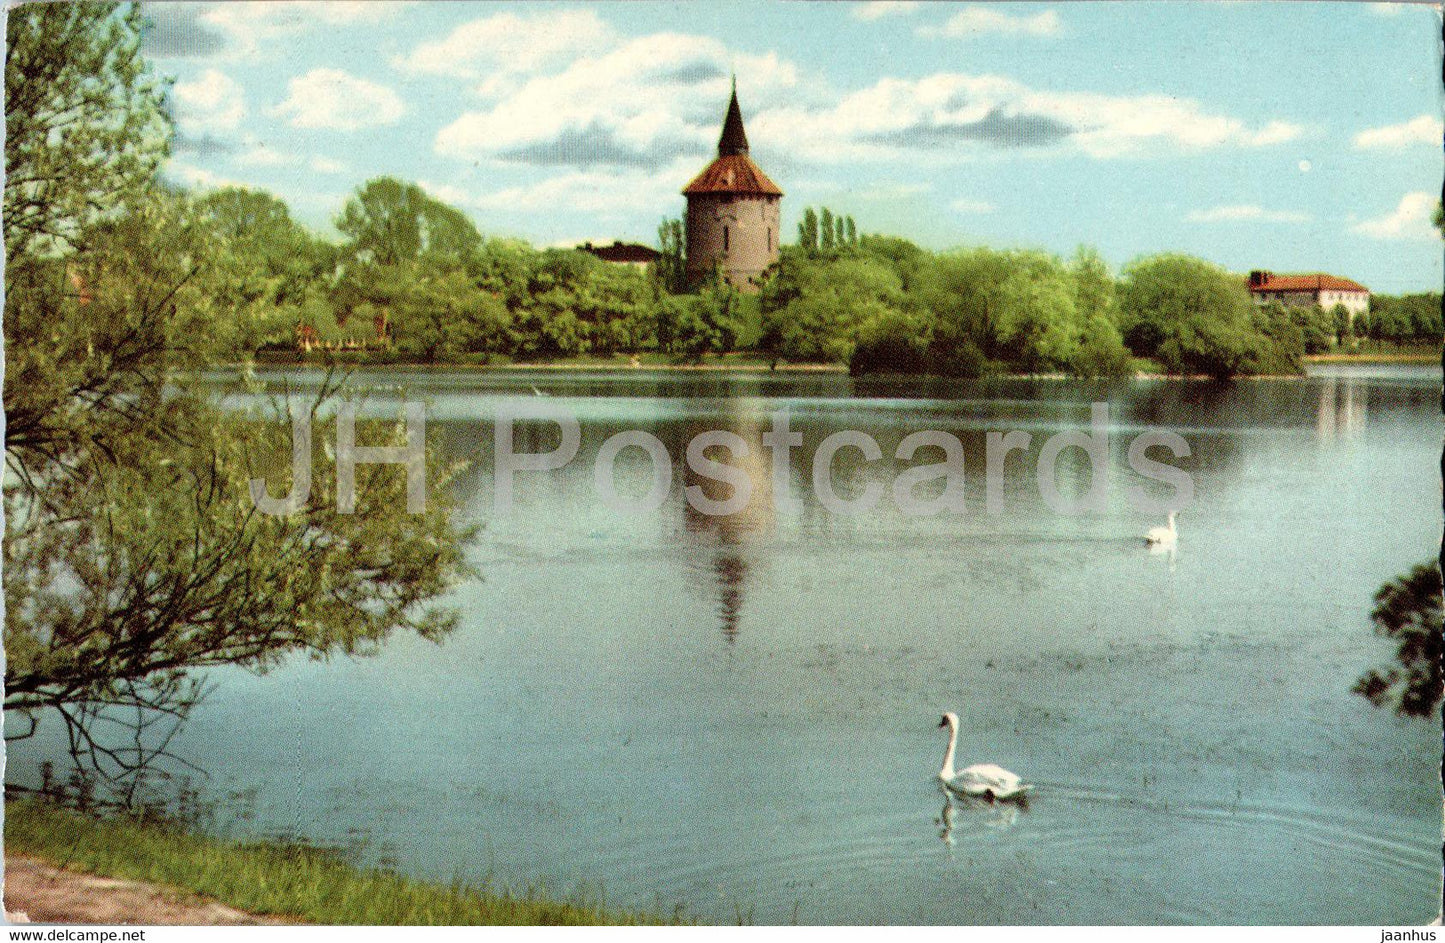 Malmo - The Willow Ponds - old postcard - Sweden - used - JH Postcards